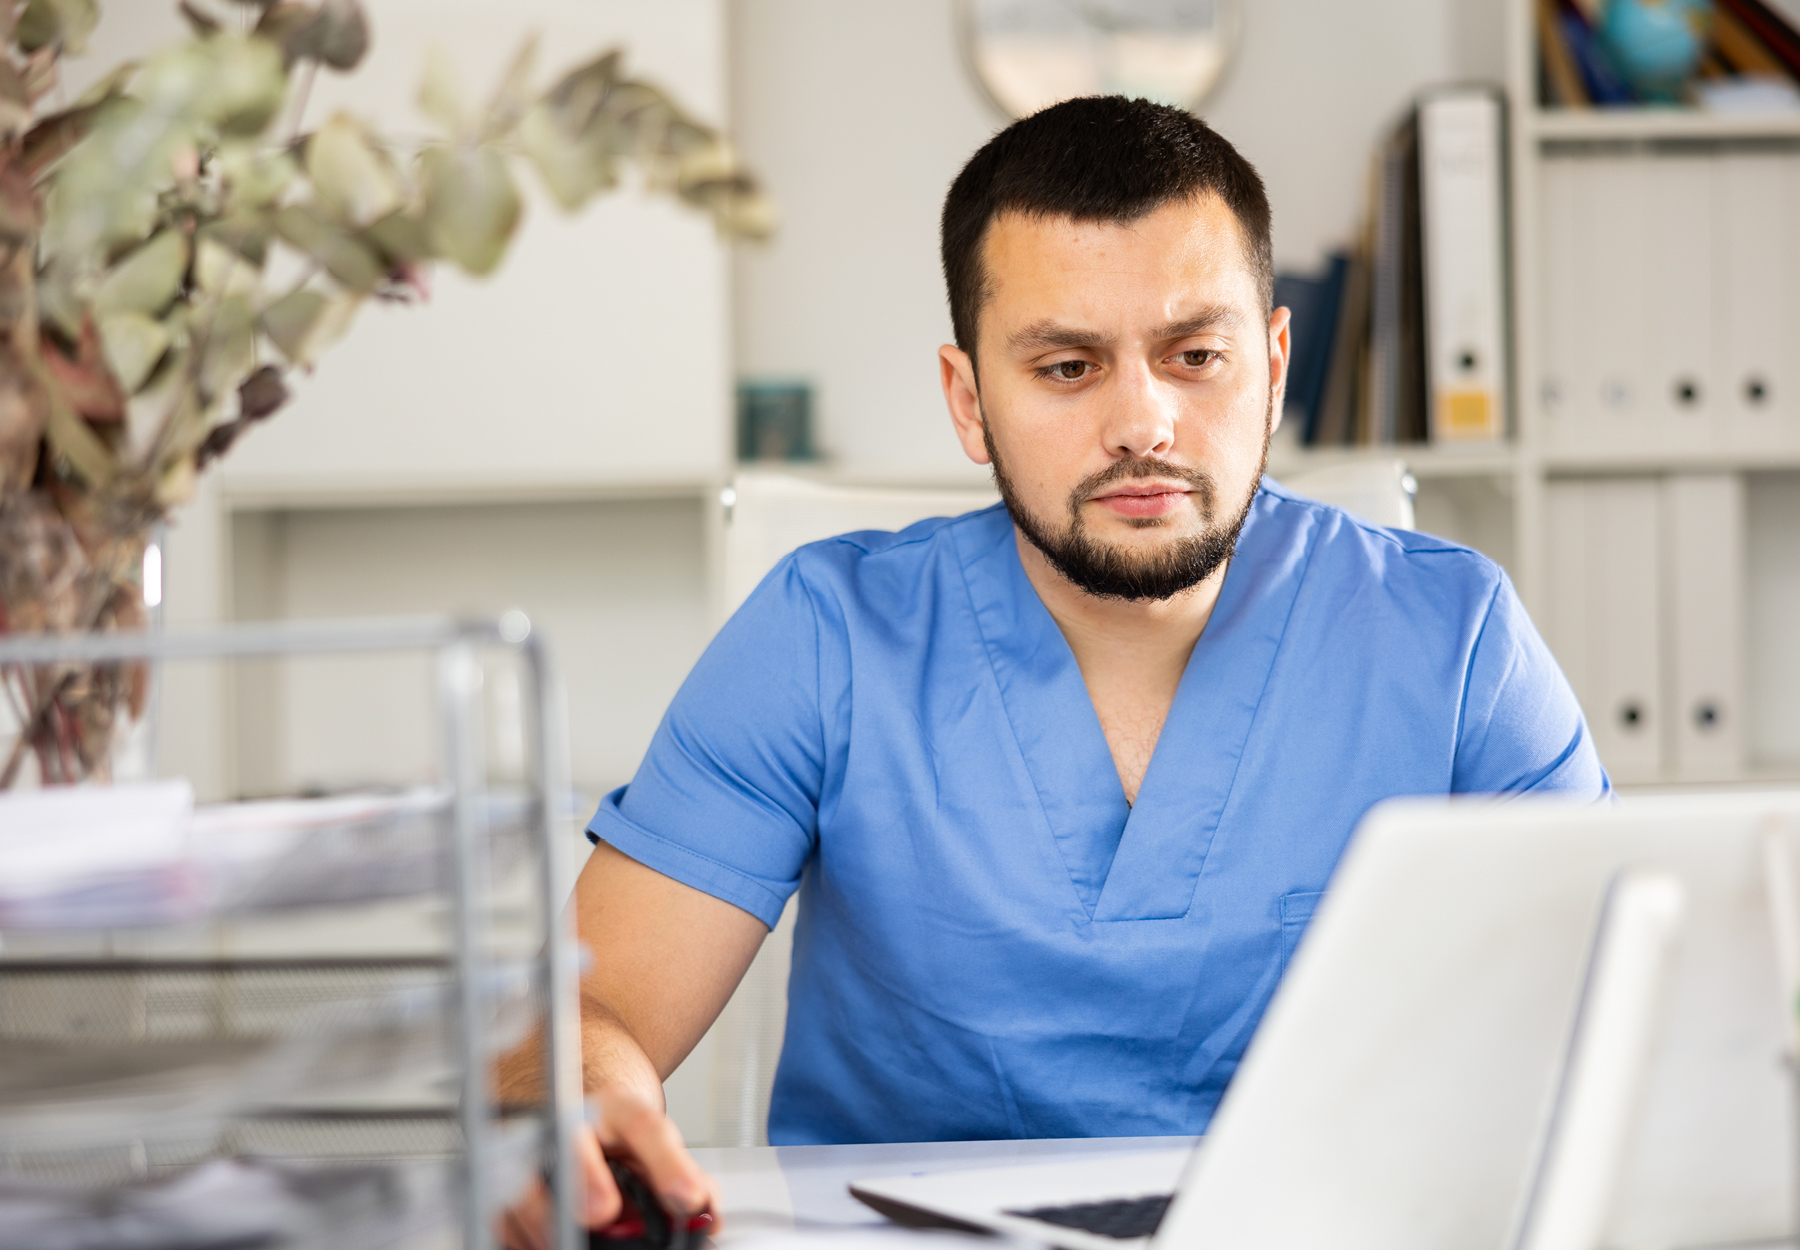 Male healthcare professional working on a laptop at his desk. Stock image.